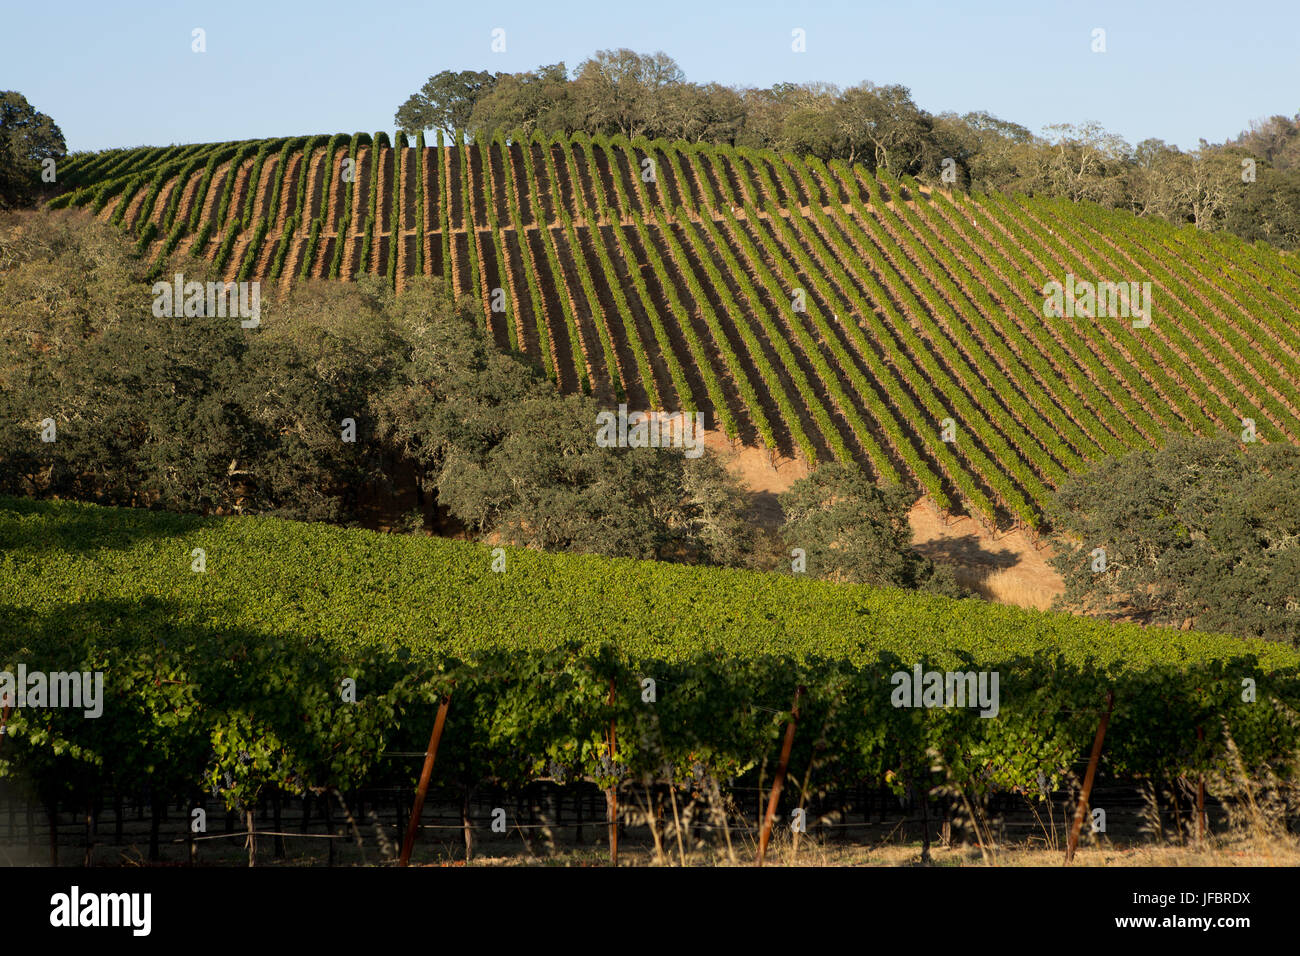 Rows of grape vineyards fill the Napa Valley hills. Stock Photo